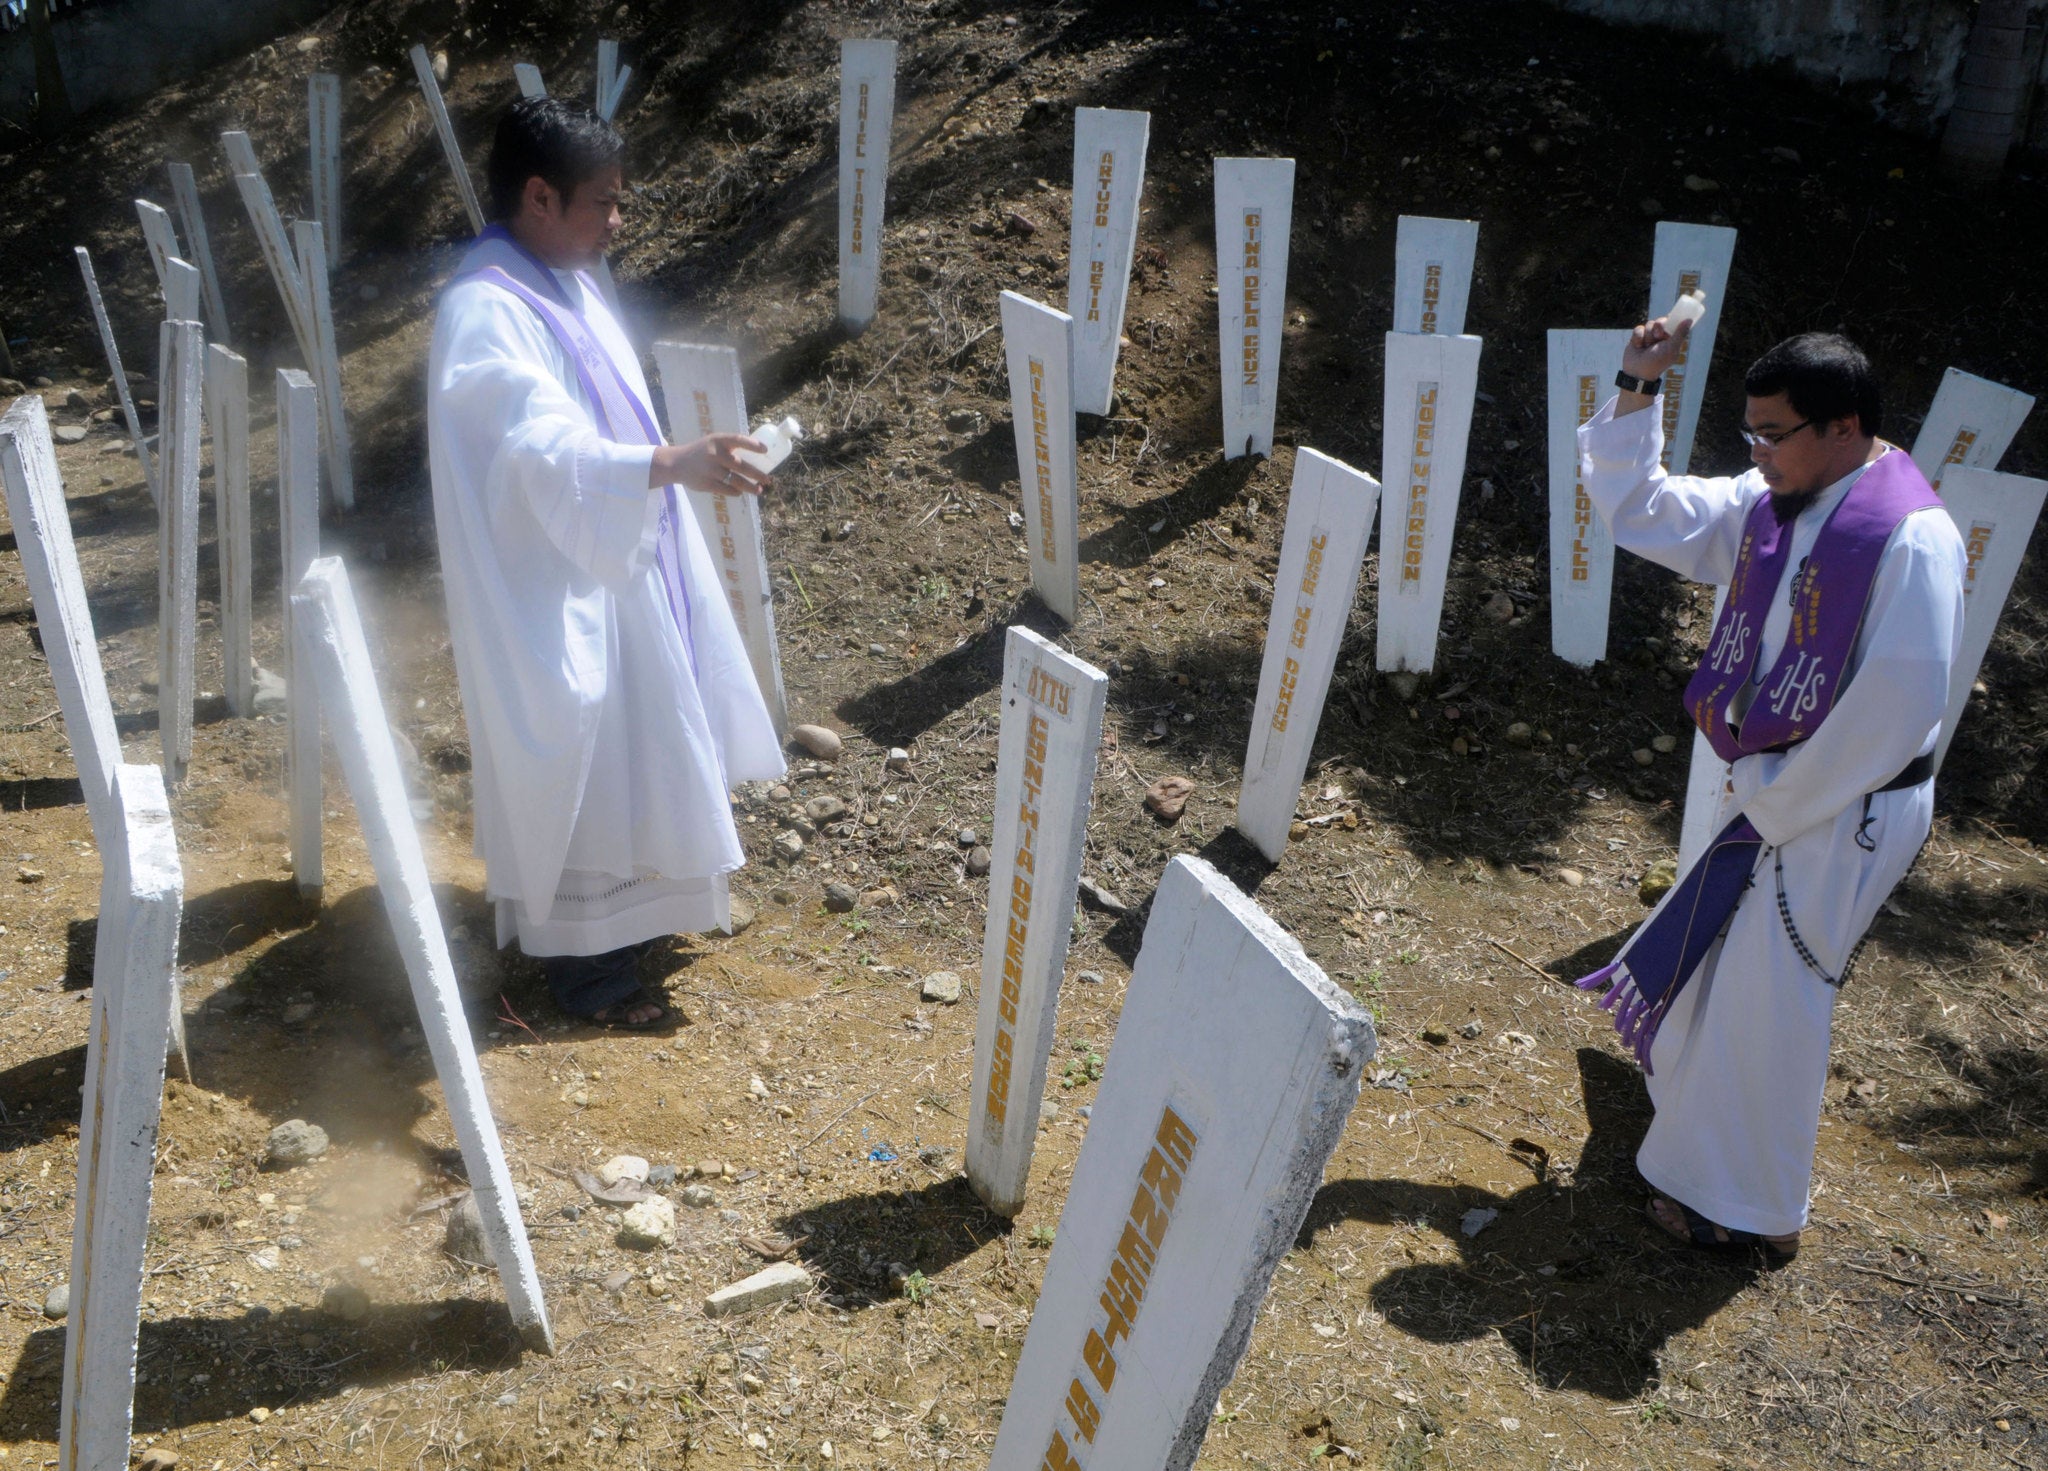 Roman Catholic priests bless the wooden markers at the site where 58 people, 32 of them journalists, were massacred at a remote village in Ampatuan township, Maguindanao province in southern Philippines.